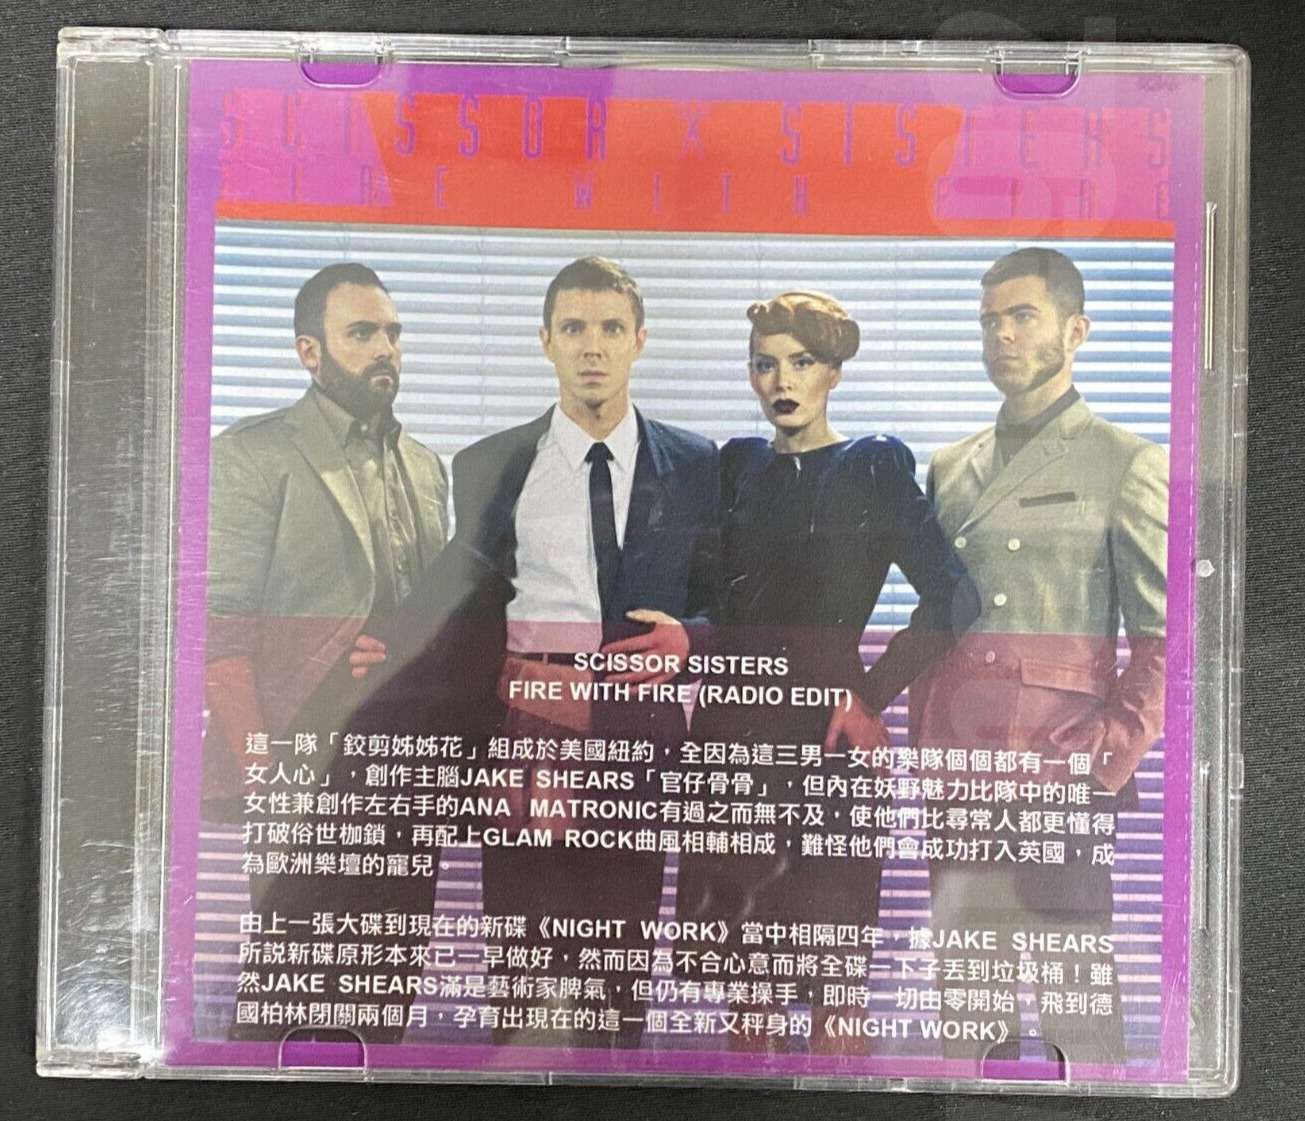 2010 Scissor Sisters Fire With Fire Hong Kong Only 1 Track Promo CD-R Mega Rare